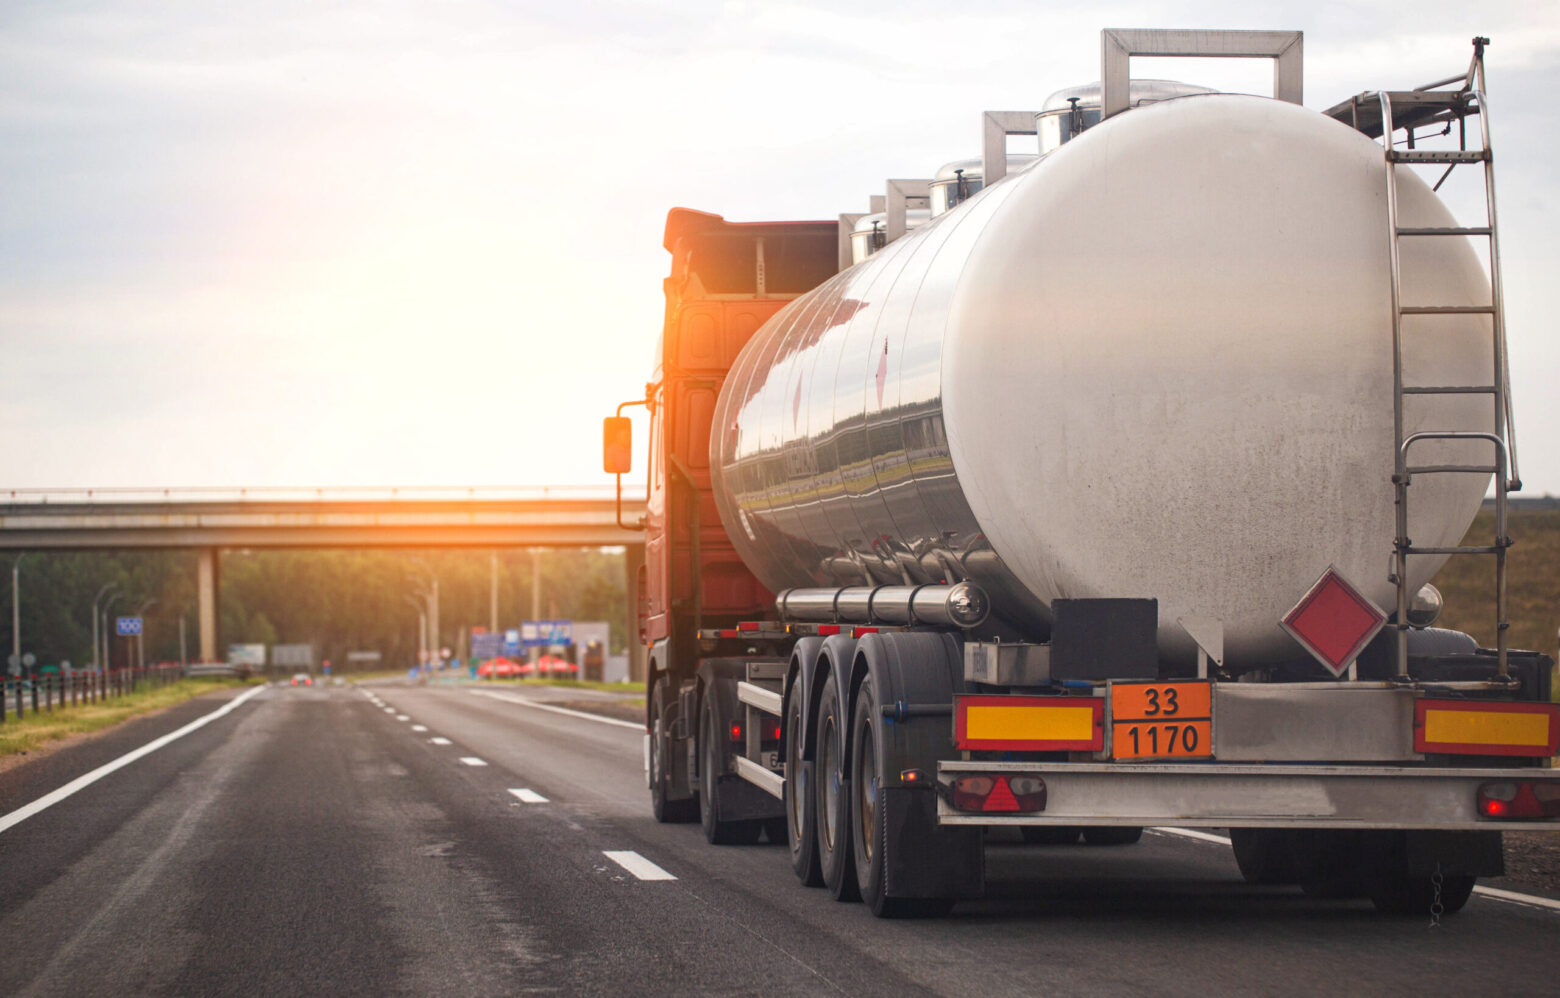 A truck with a tank trailer transports a liquid dangerous cargo on a highway against the backdrop of a sunset. Copy space for text